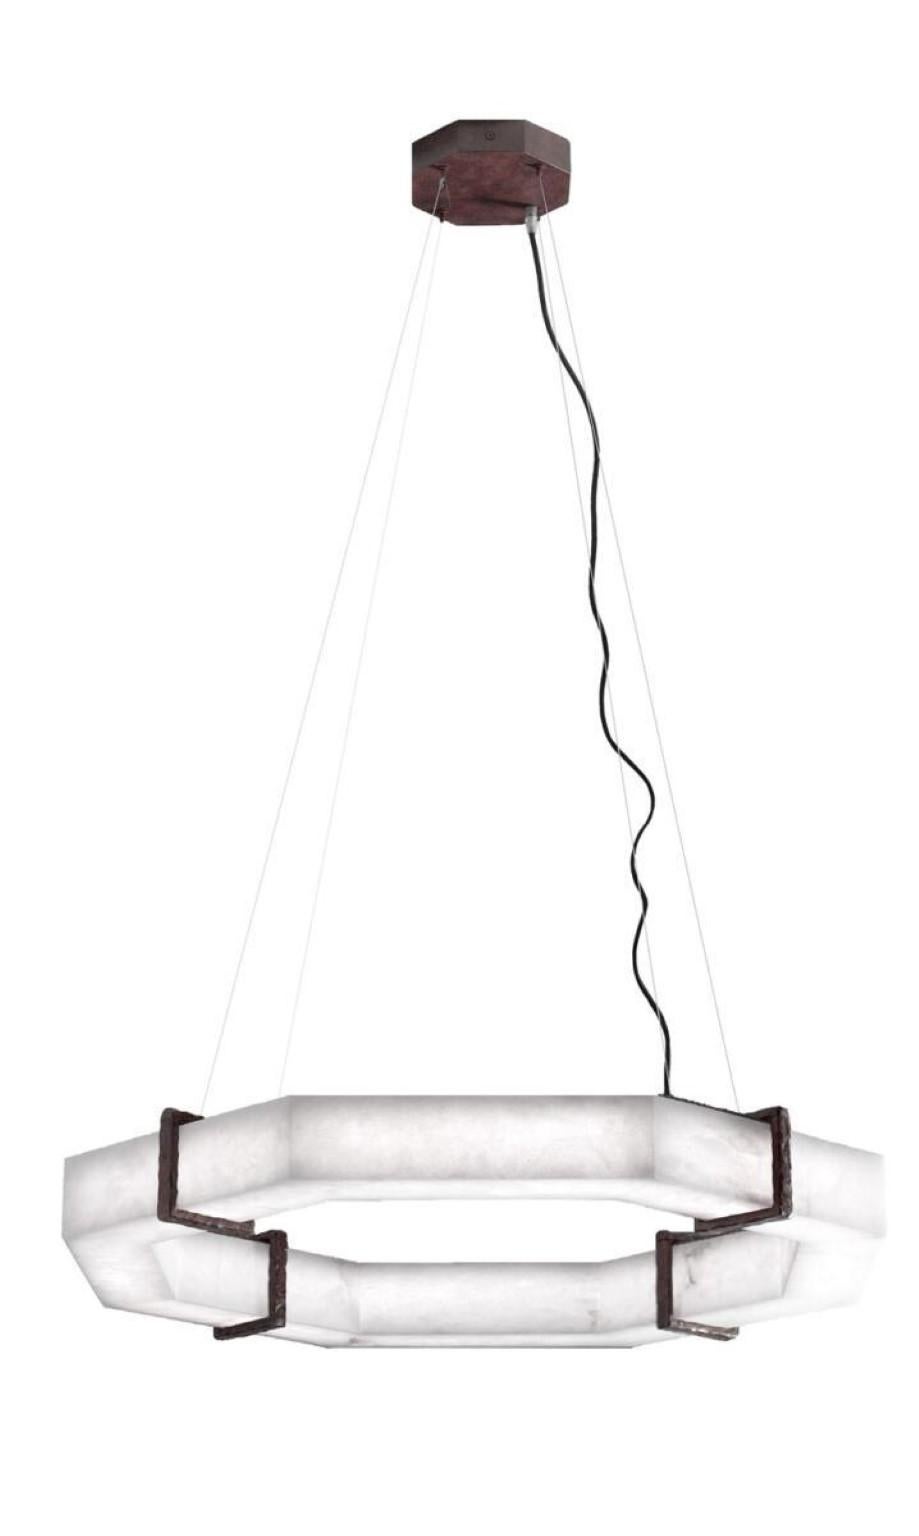 Pendant light Efesto by Alabastro Italiano
Dimensions: D 80 x H 150 cm
Materials: Italian white Alabaster, Italian hand wrought iron, Ruggine of Florence, black silk cable
Other finishes available.
Light Source 1 x strip LED 45 Watt, Tot. 4900